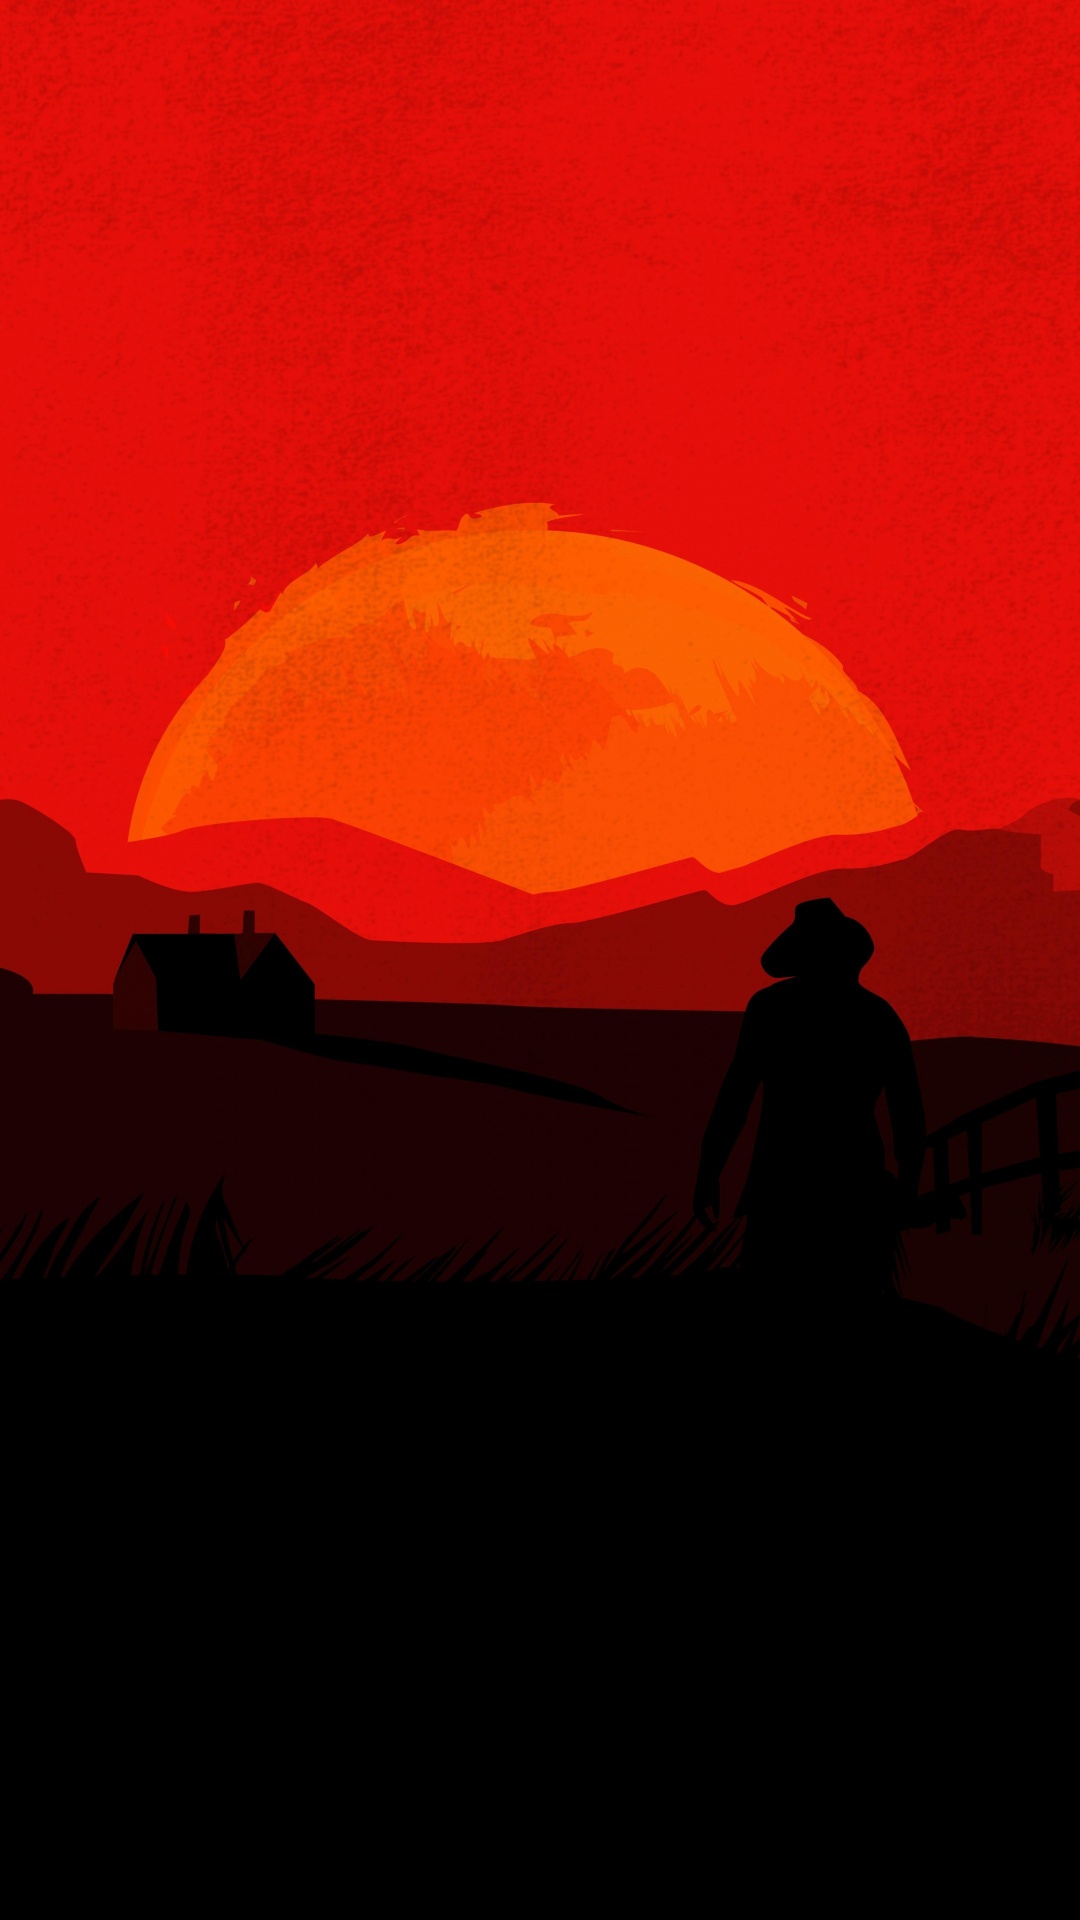 Red Dead Redemption 2, Red Dead Redemption, Red, Afterglow, Lever. Wallpaper in 1080x1920 Resolution